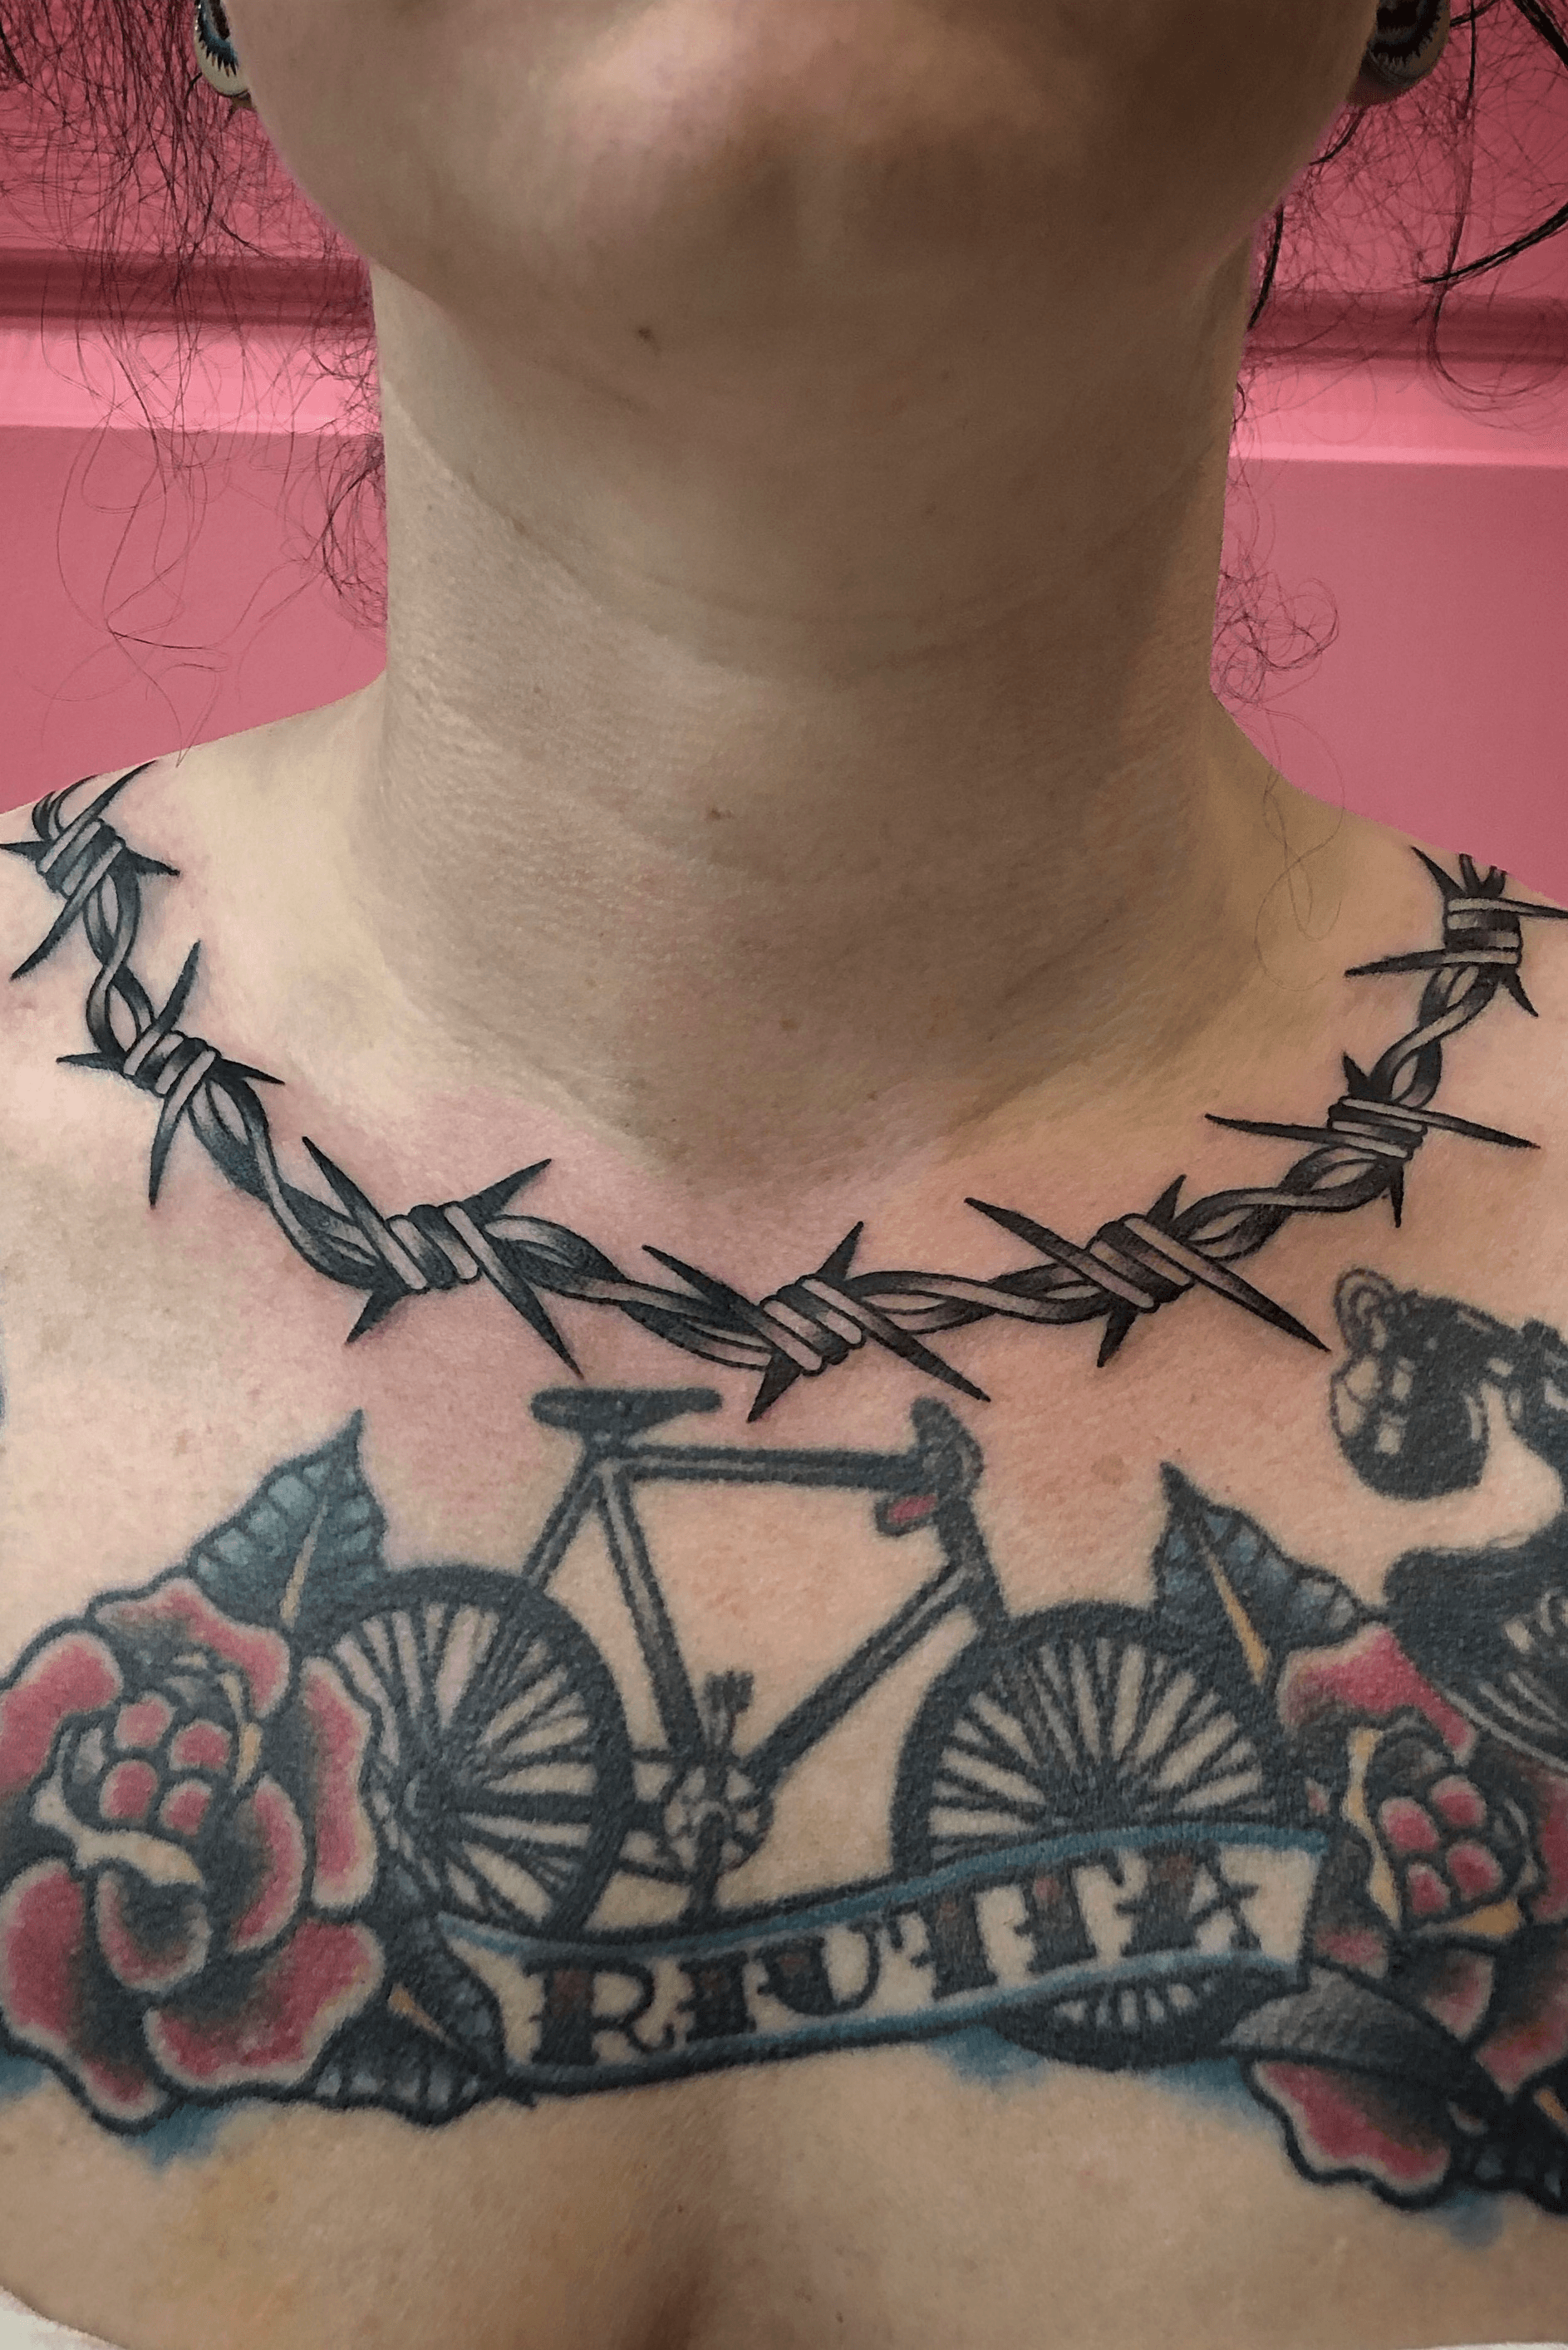 10 Bold and Captivating Barbed Wire Tattoo Designs